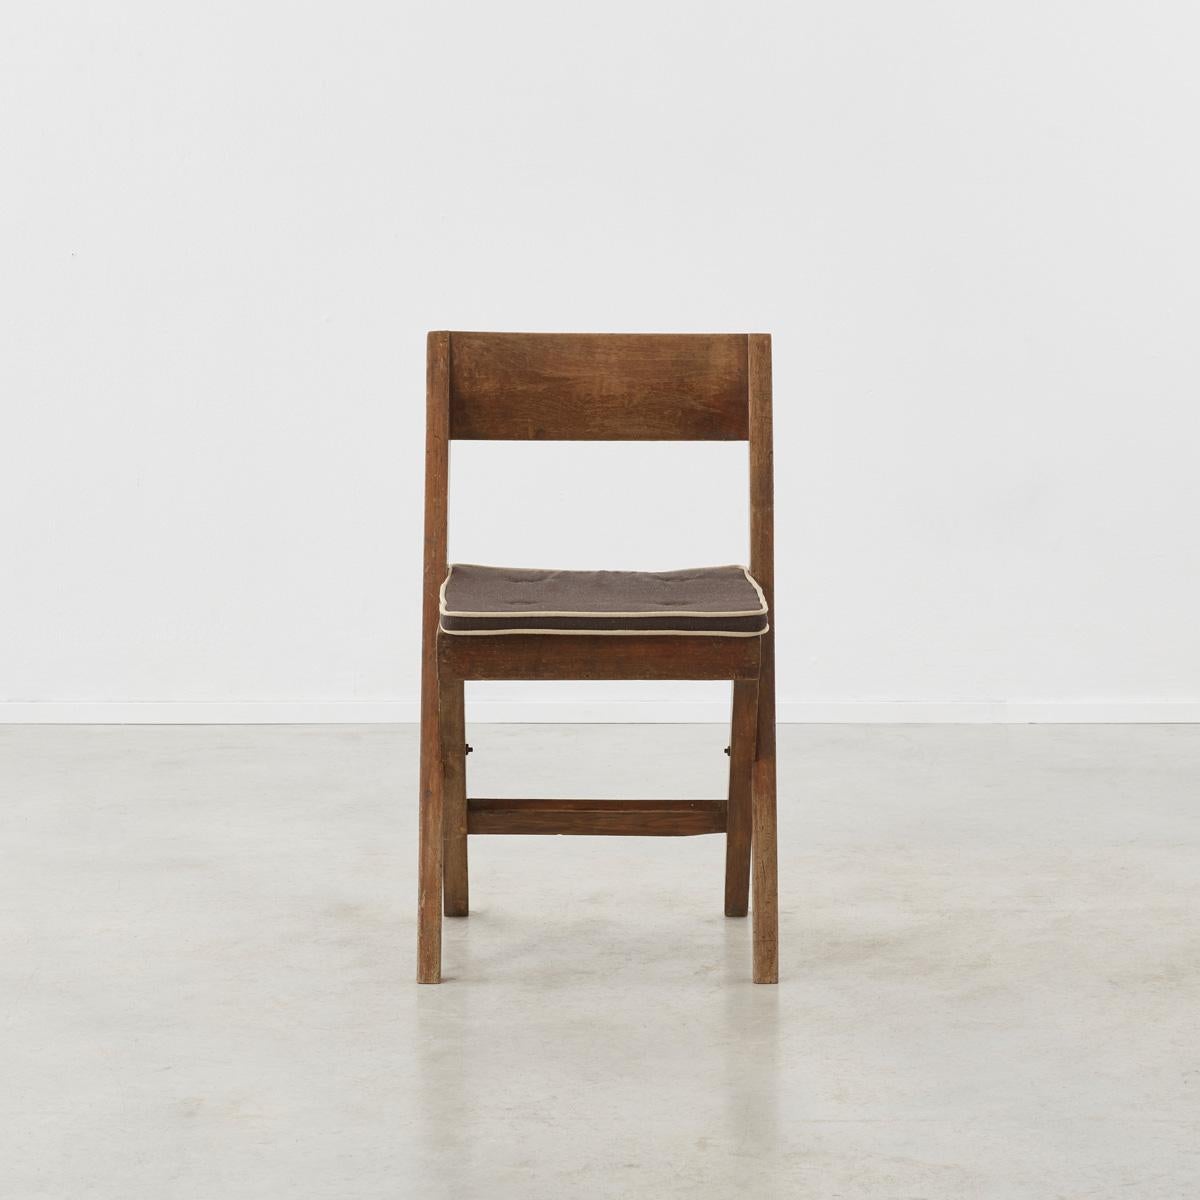 Modern Pierre Jeanneret ‘Library’ chair, model no. PJ-SI-51-A, France/India, 1956 For Sale